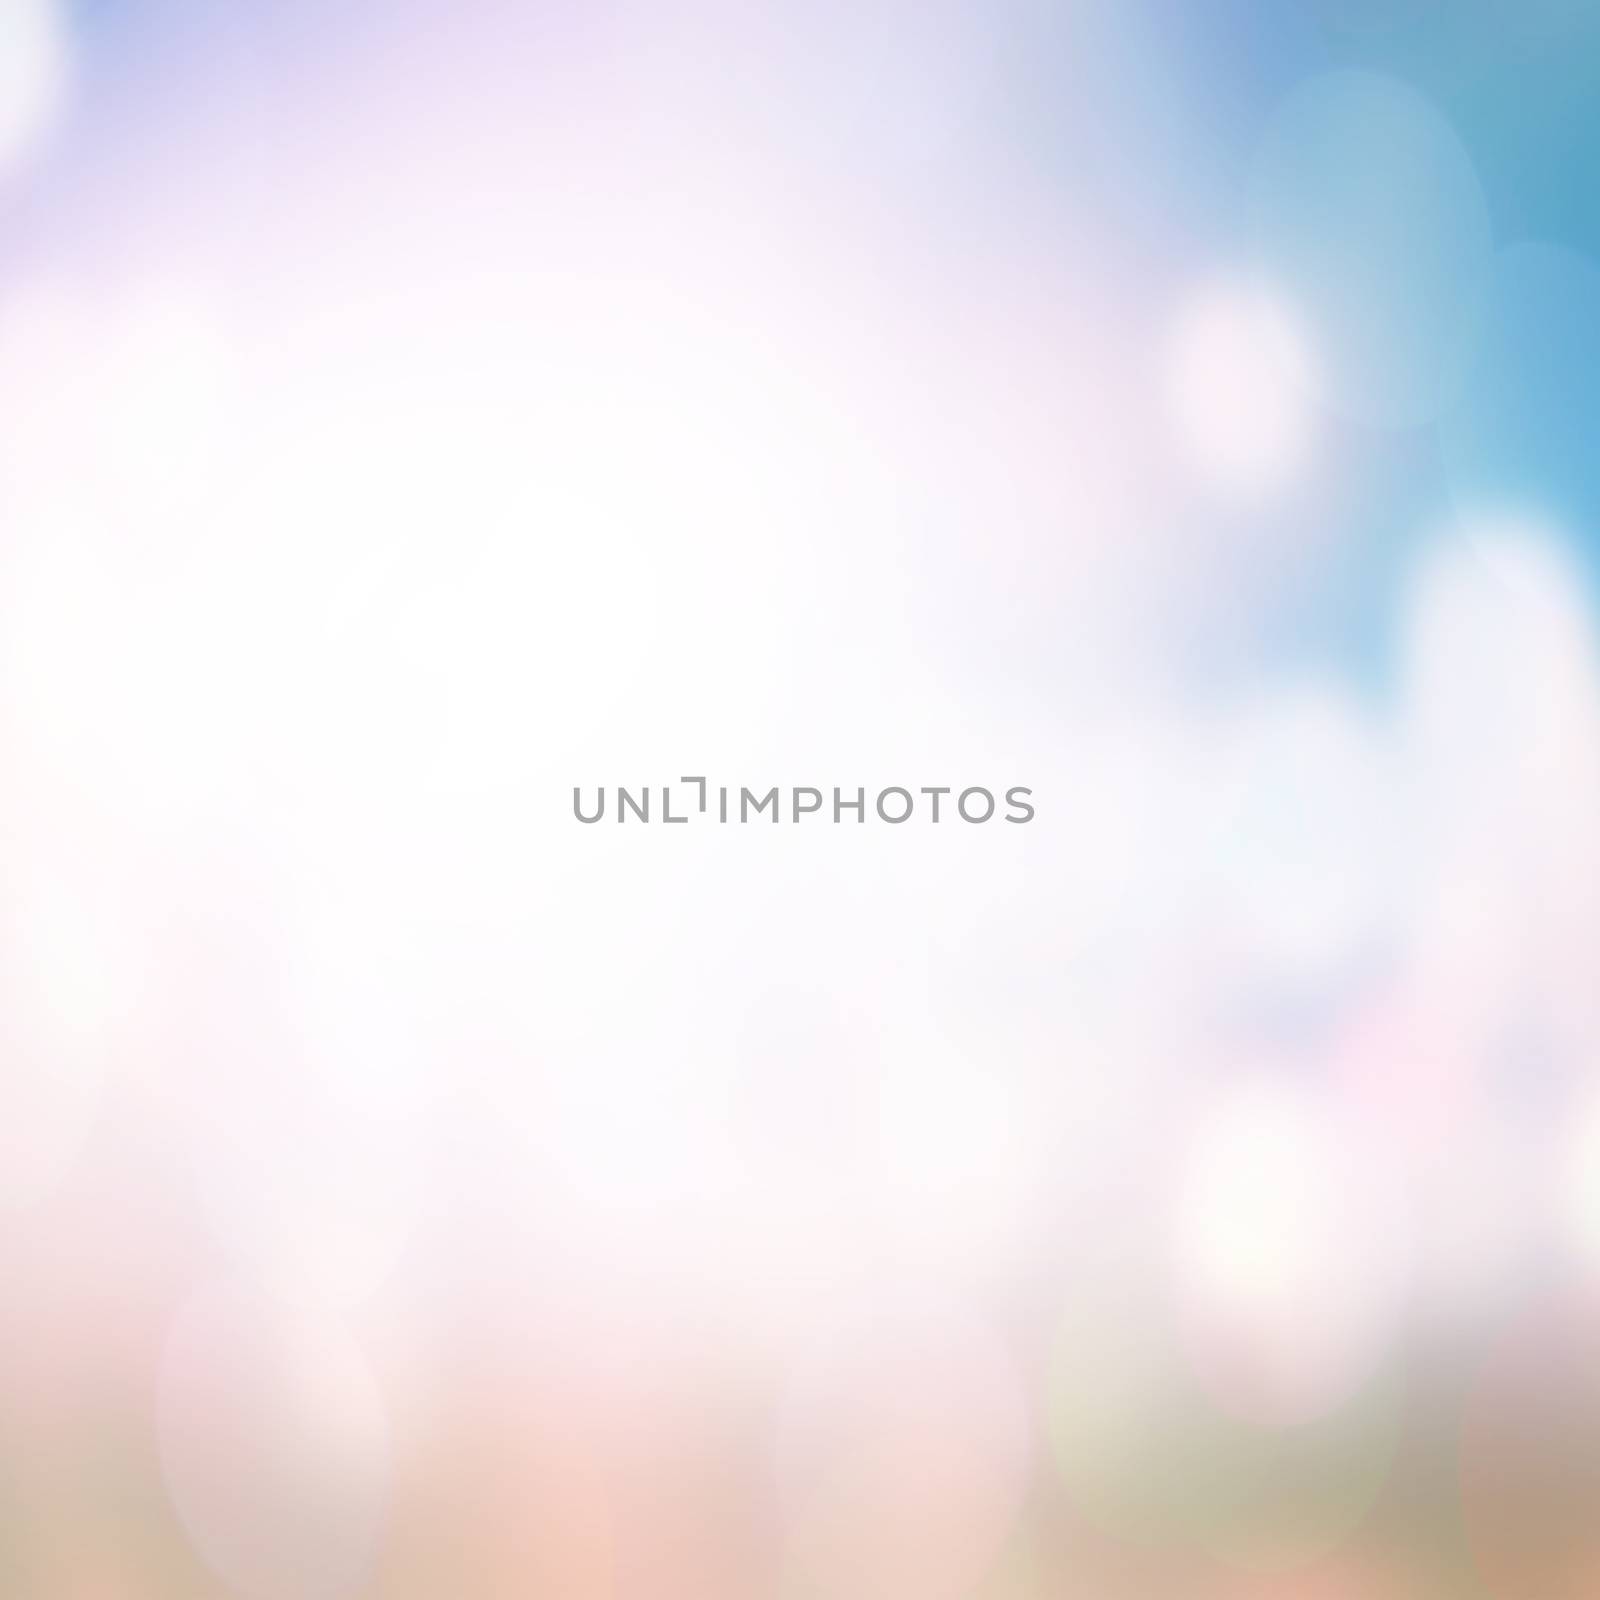 blurred abstract nature background